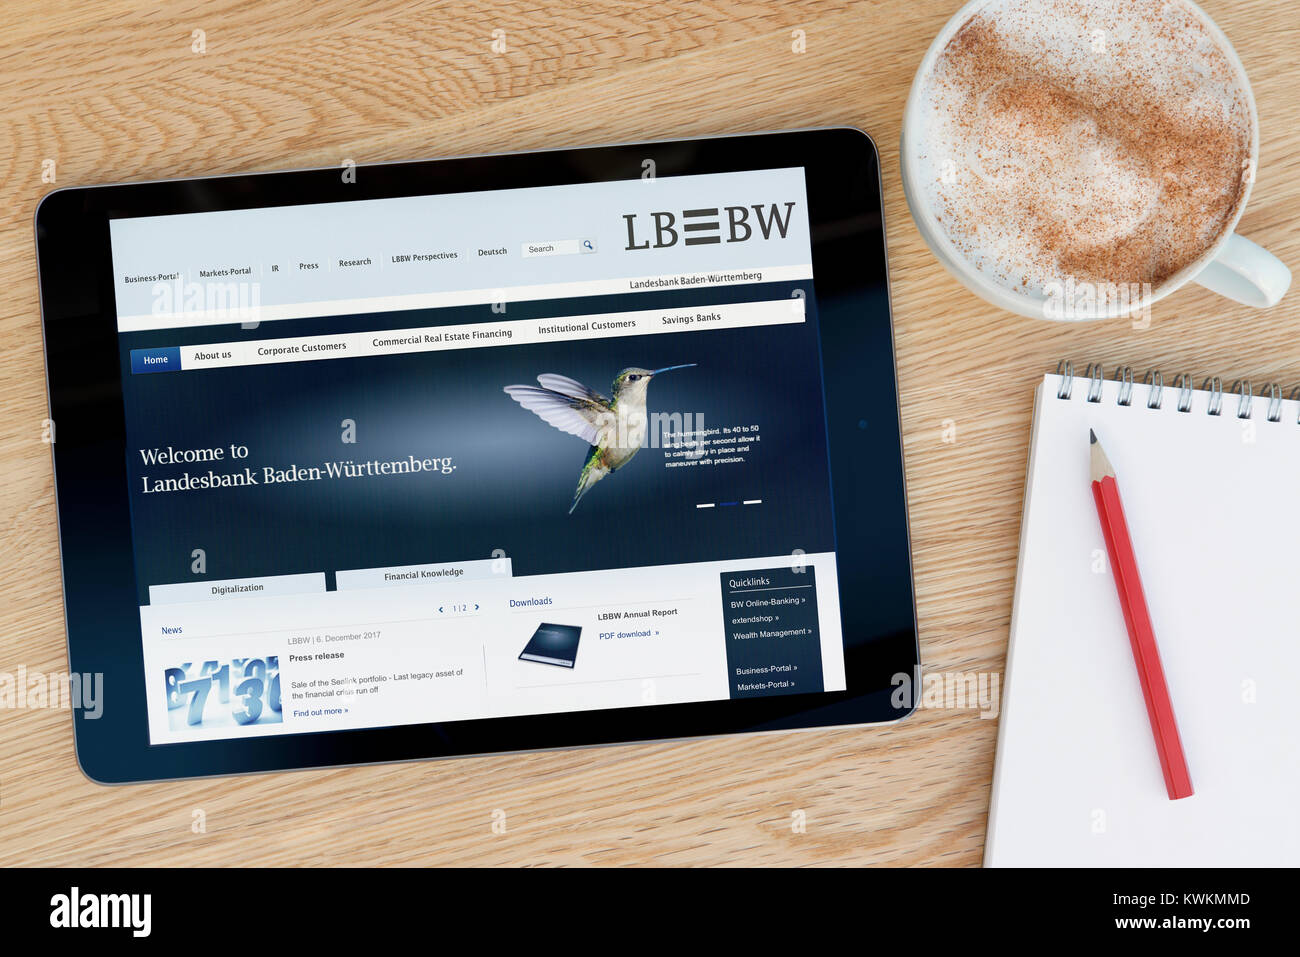 The LBBW (Landesbank Baden-Württemberg) website on an iPad tablet device, on a wooden table beside a notepad, pencil and cup of coffee -Editorial only Stock Photo